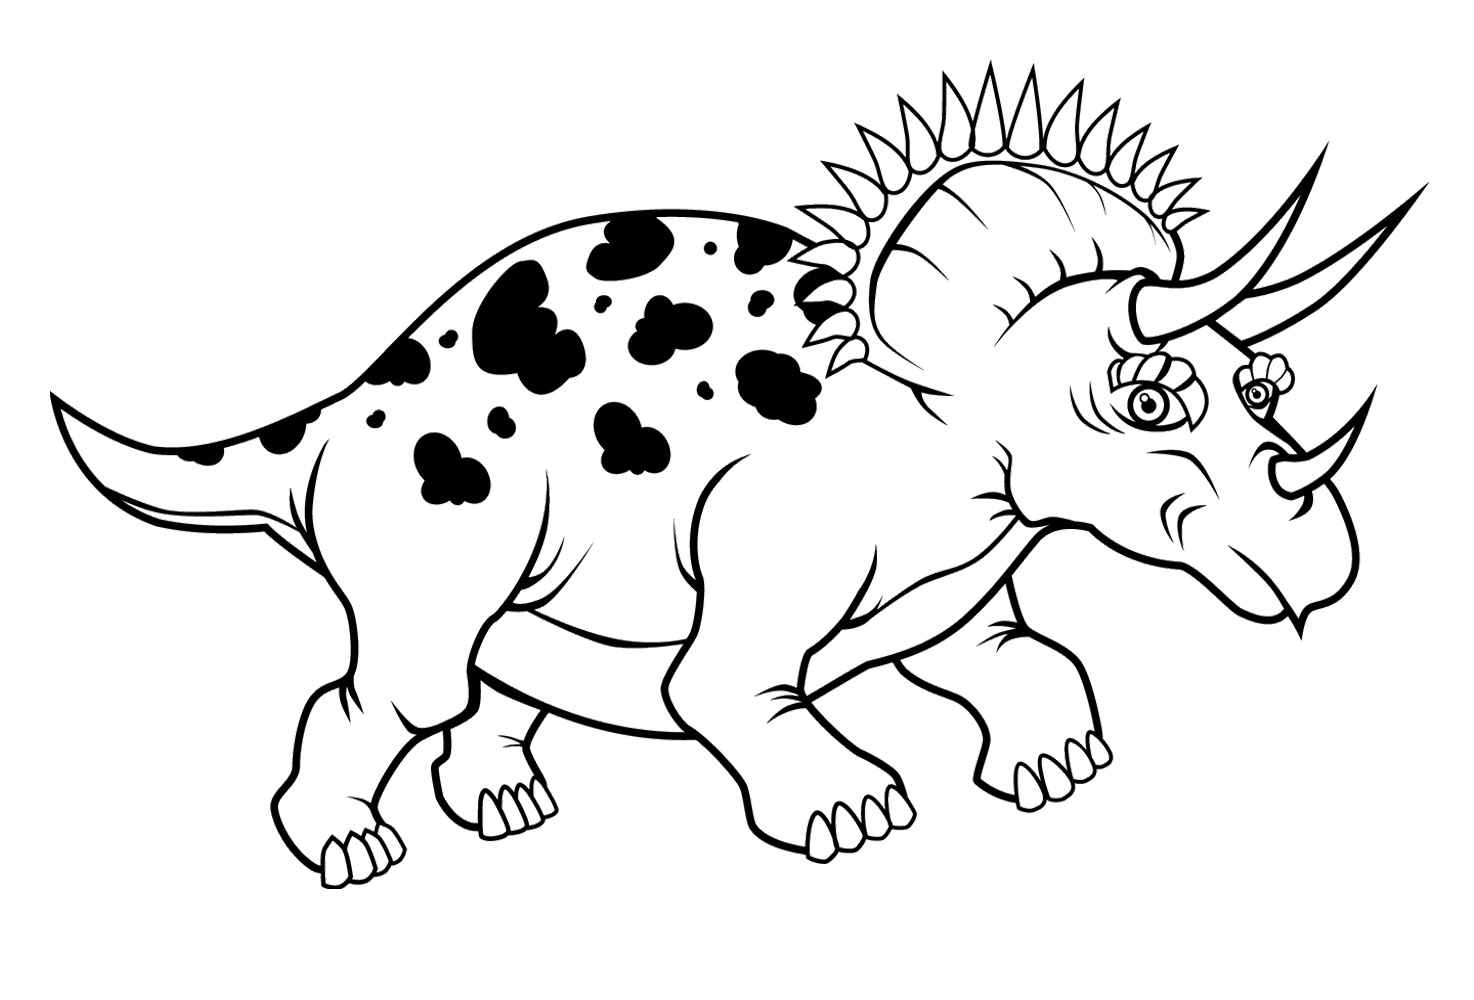 Dinosaur Coloring Pages Triceratops at GetColorings.com | Free ...